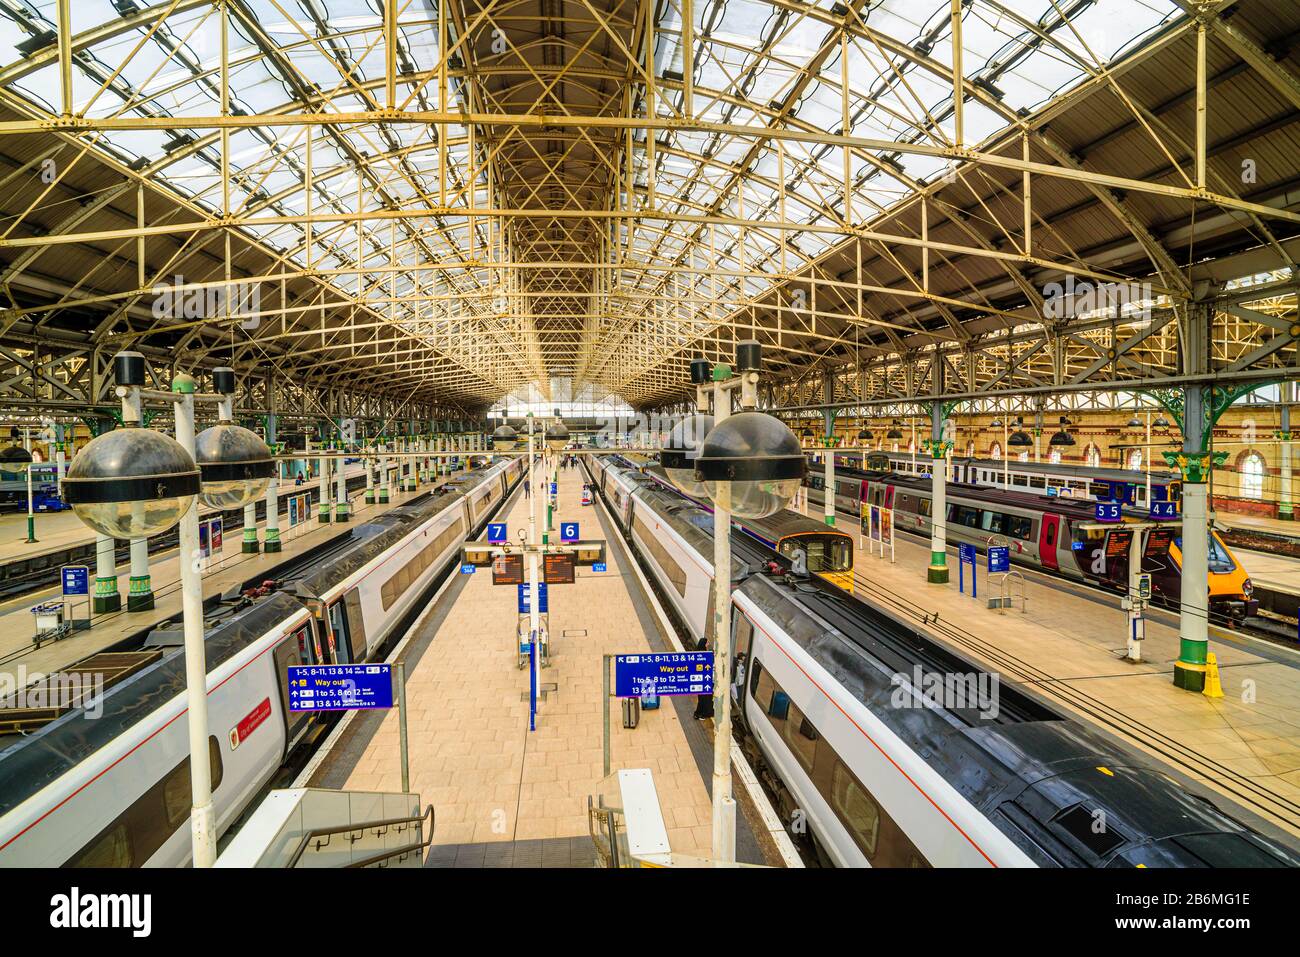 Train-shed and platforms, Manchester Piccadilly Stock Photo